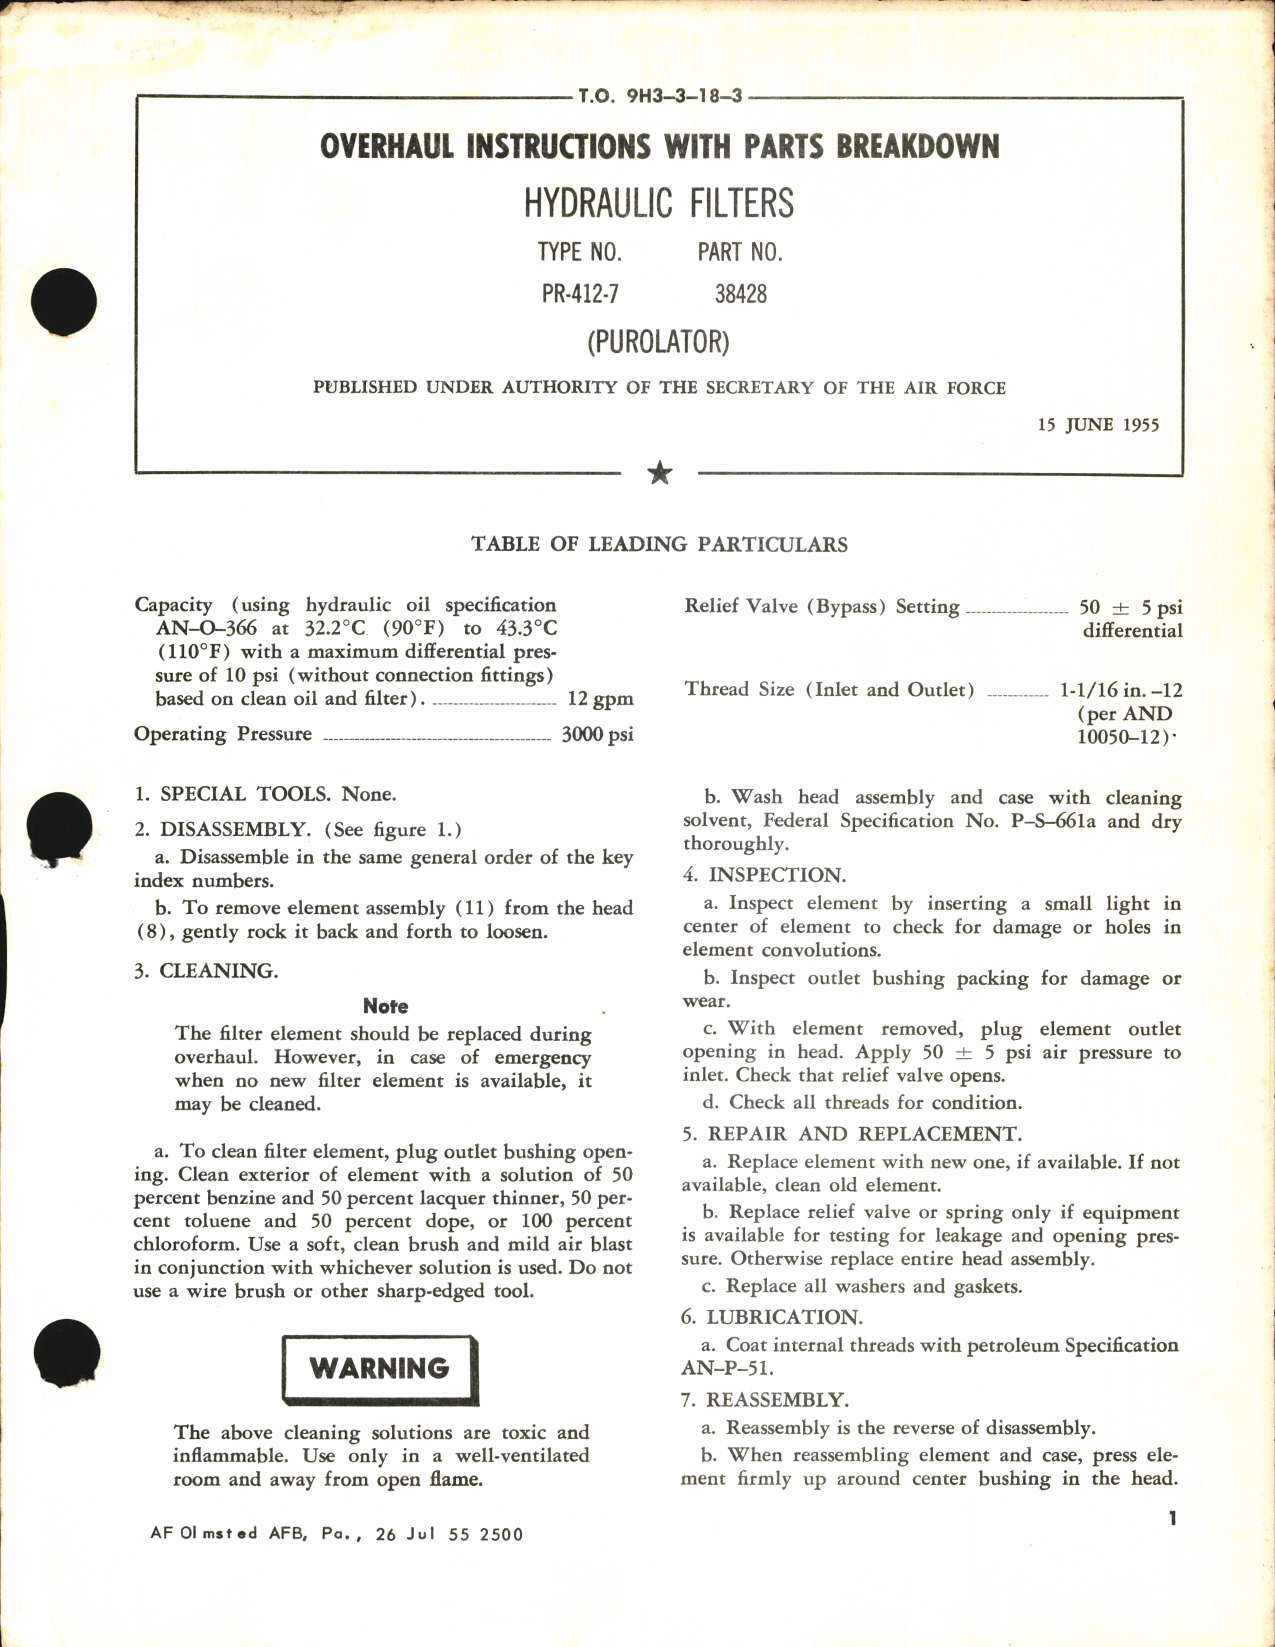 Sample page 1 from AirCorps Library document: Overhaul Instructions with Parts Breakdown for Hydraulic Filters Type no. PR-412-7, Part No. 38428